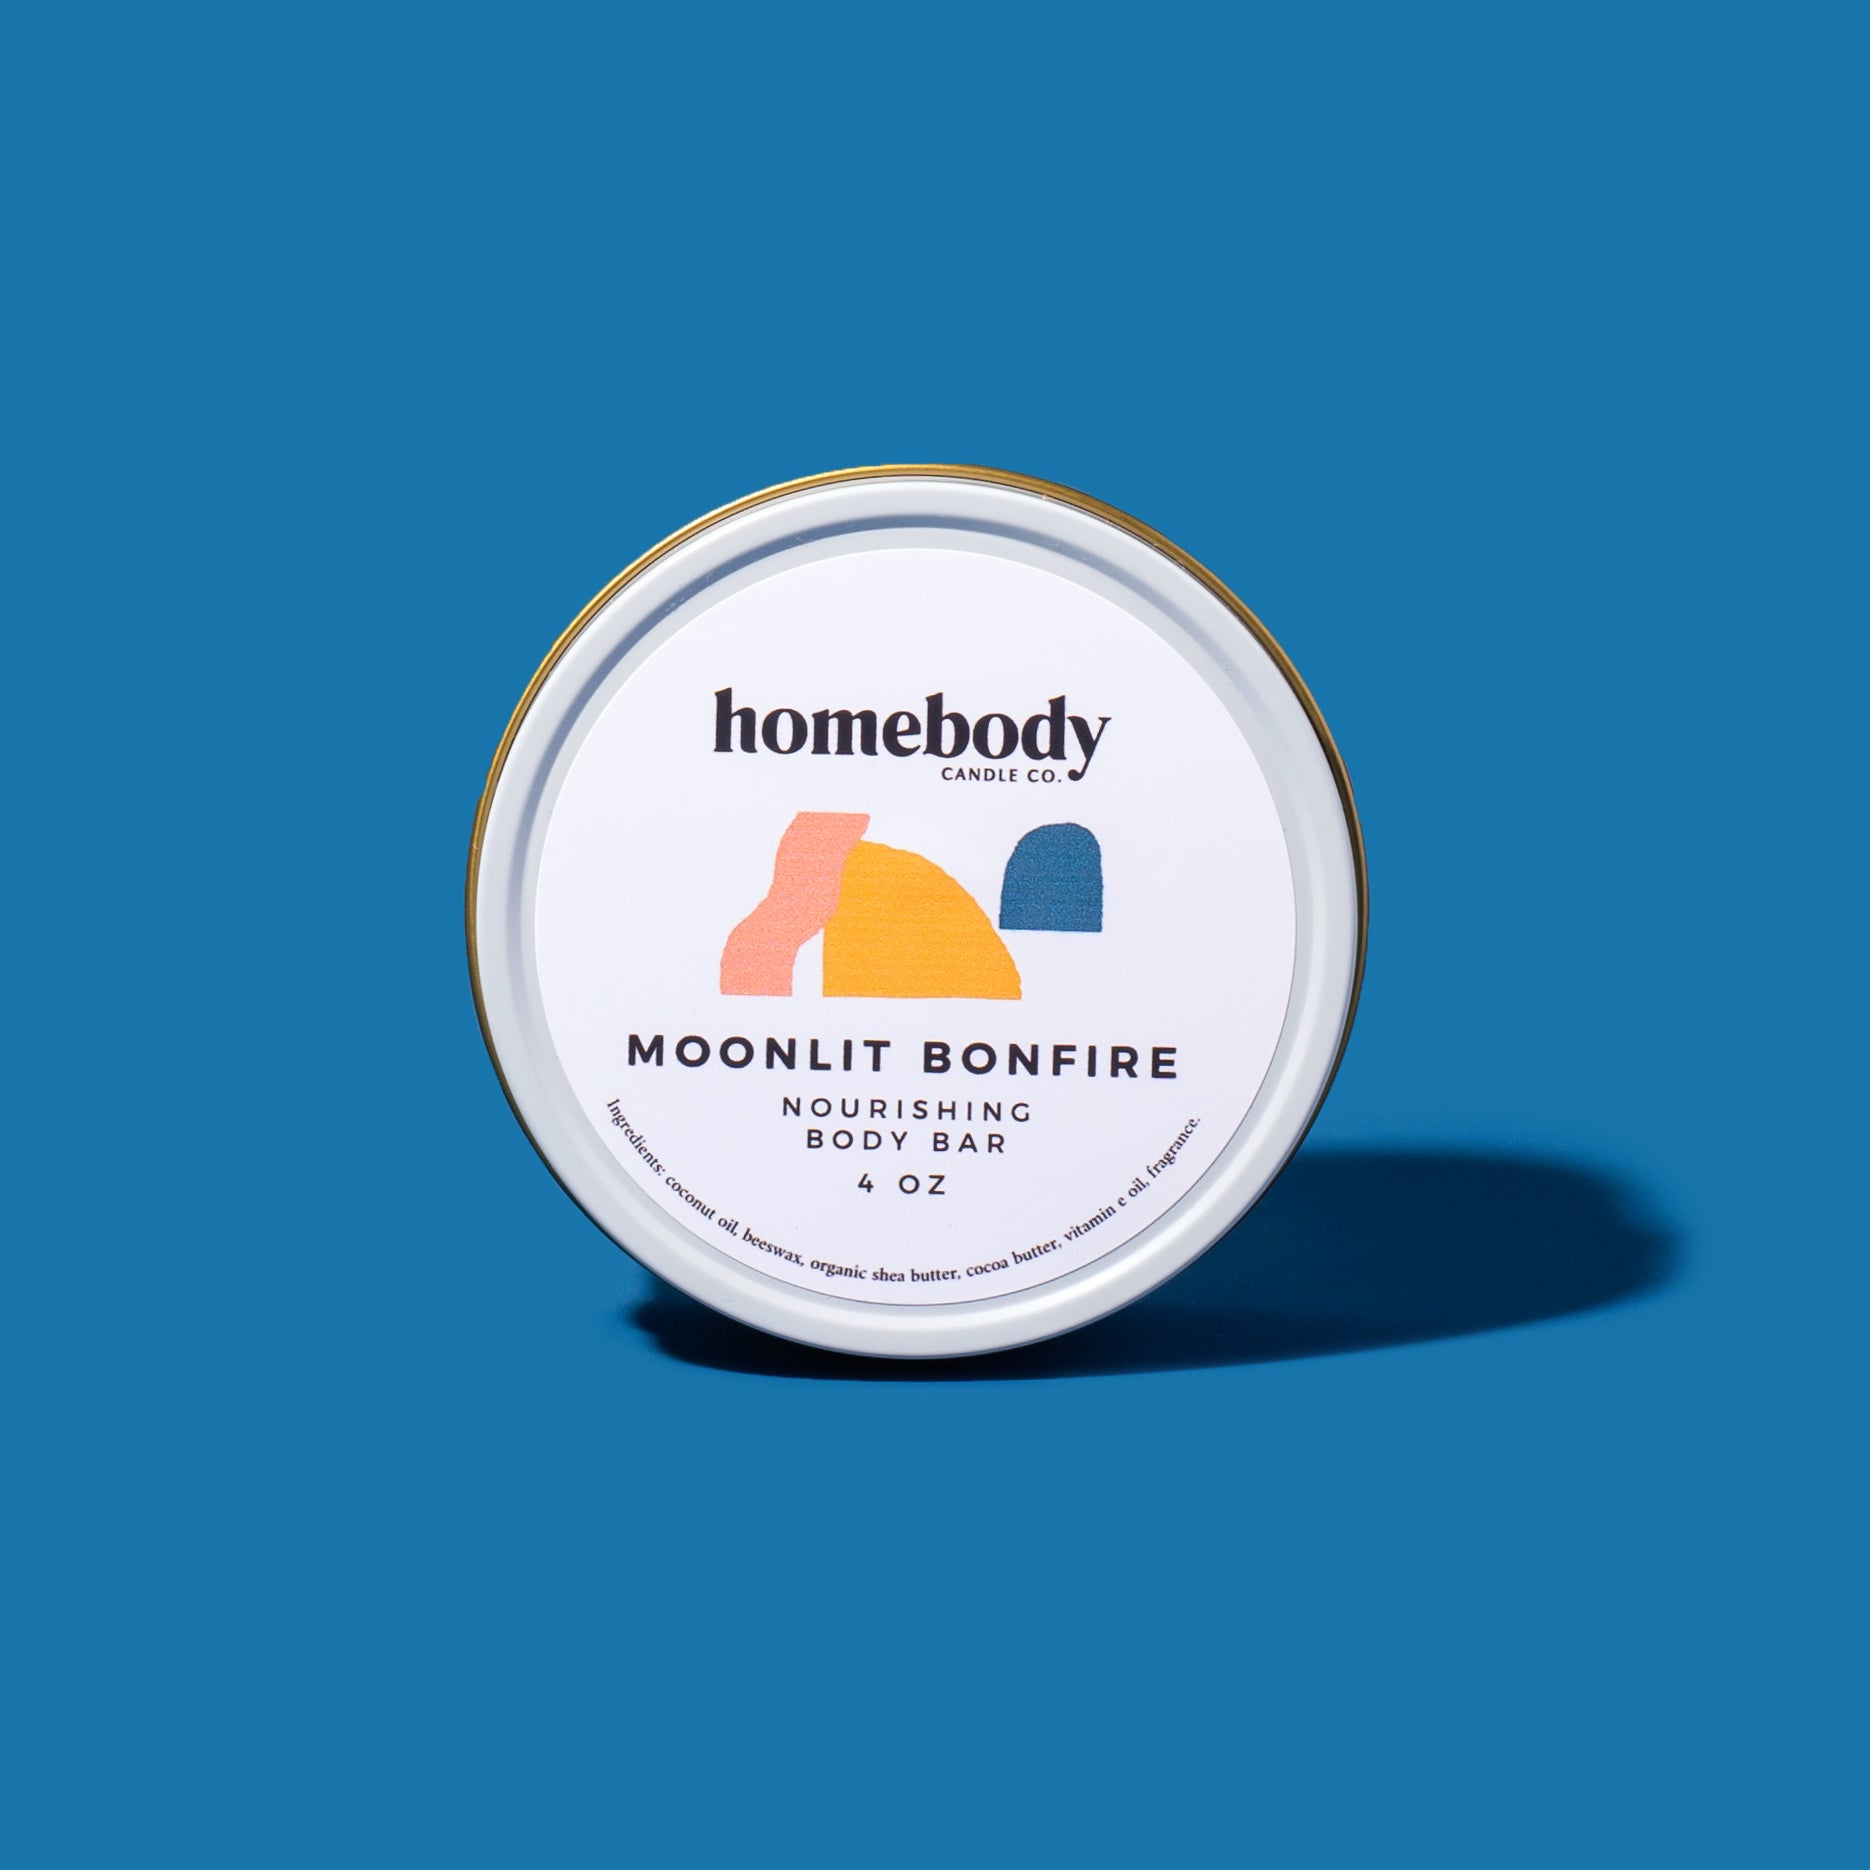 Moonlit Bonfire ✸ fall collection body bar Homebody Candle Co